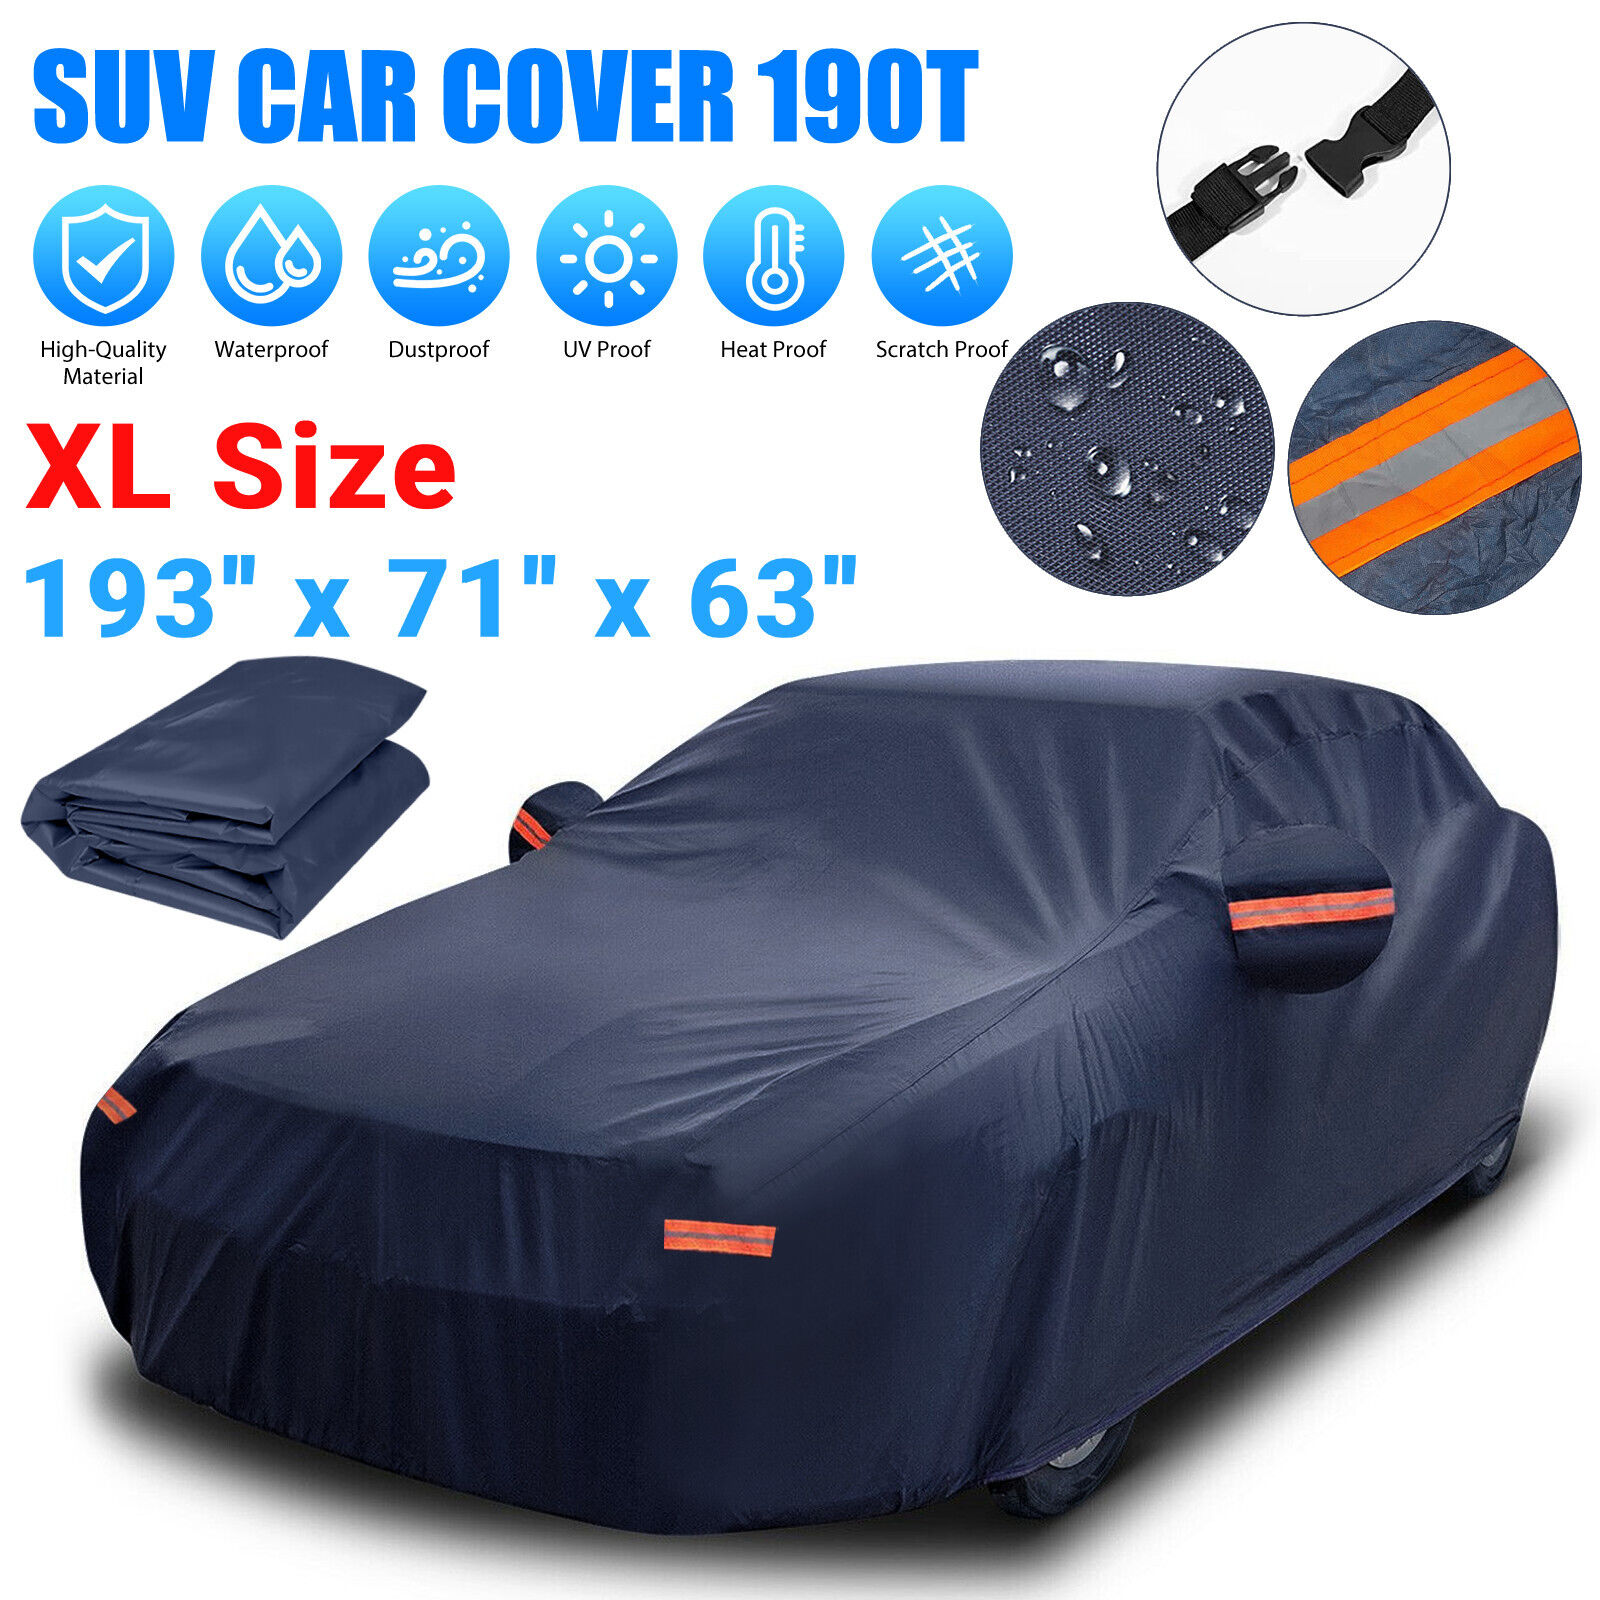 Full Car Cover for Outdoor Sun Dust Scratch Rain Snow UV Waterproof Breathable